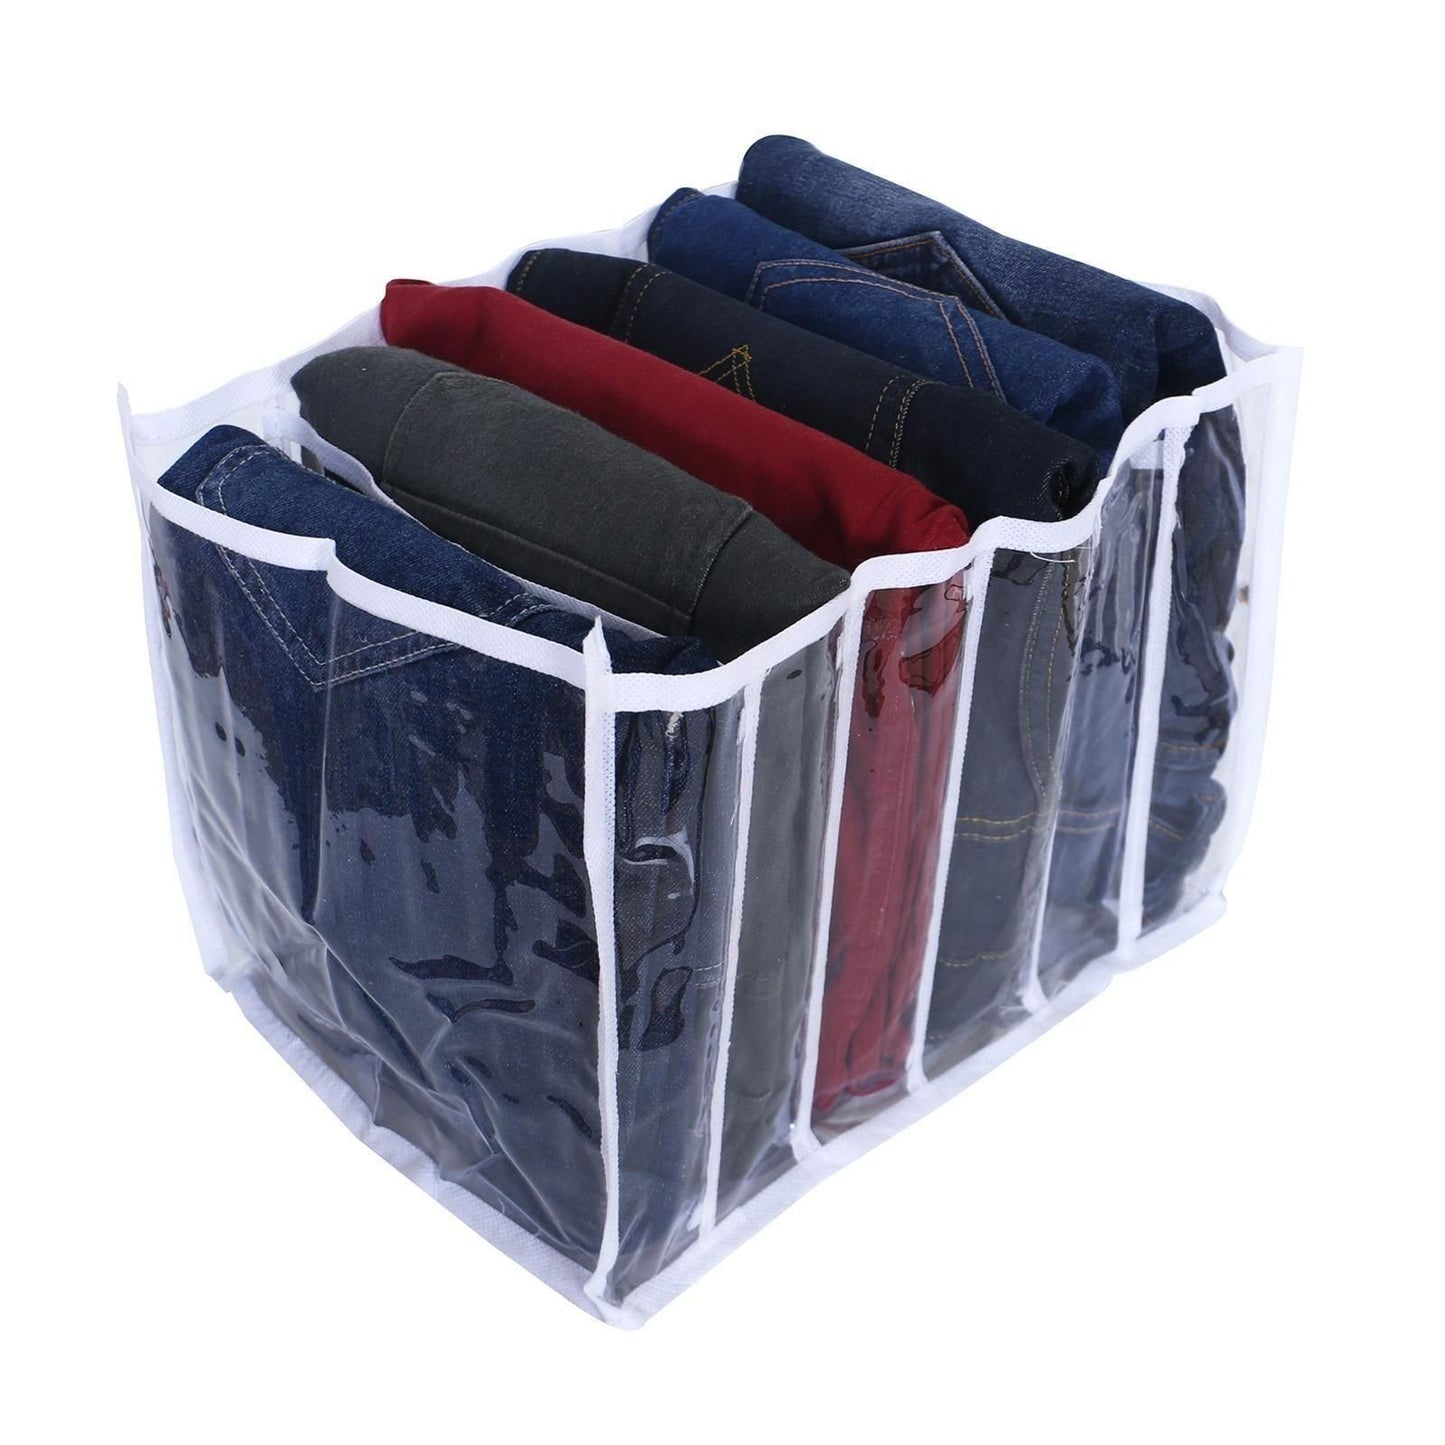 6 Grids Clothes Organizer (Pack of 6)